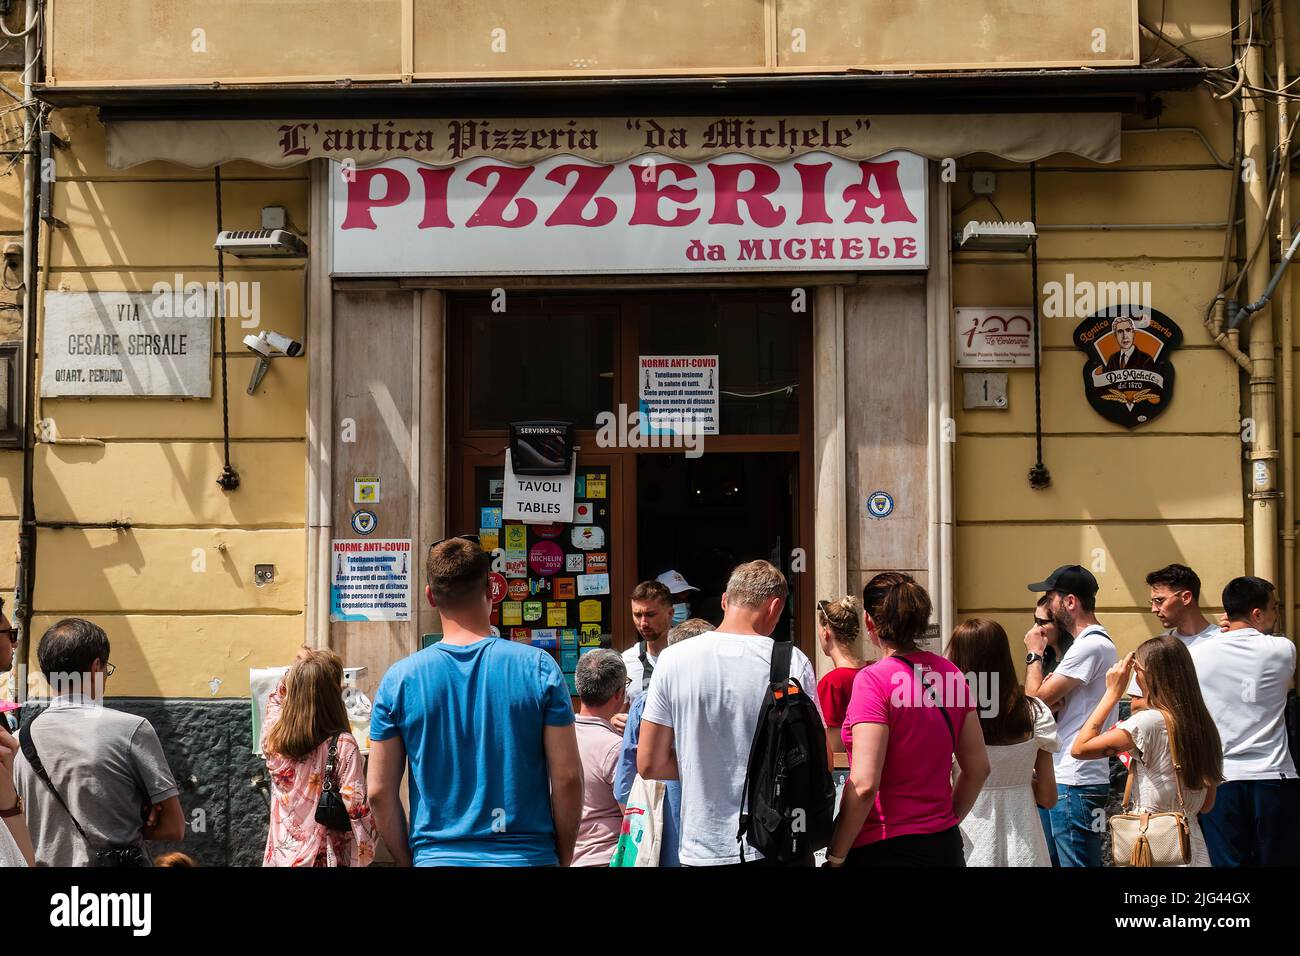 Naples, Italy. May 27, 2022. People waiting outside the famous L'antica Pizzeria da Michele in Naples, Italy. Stock Photo